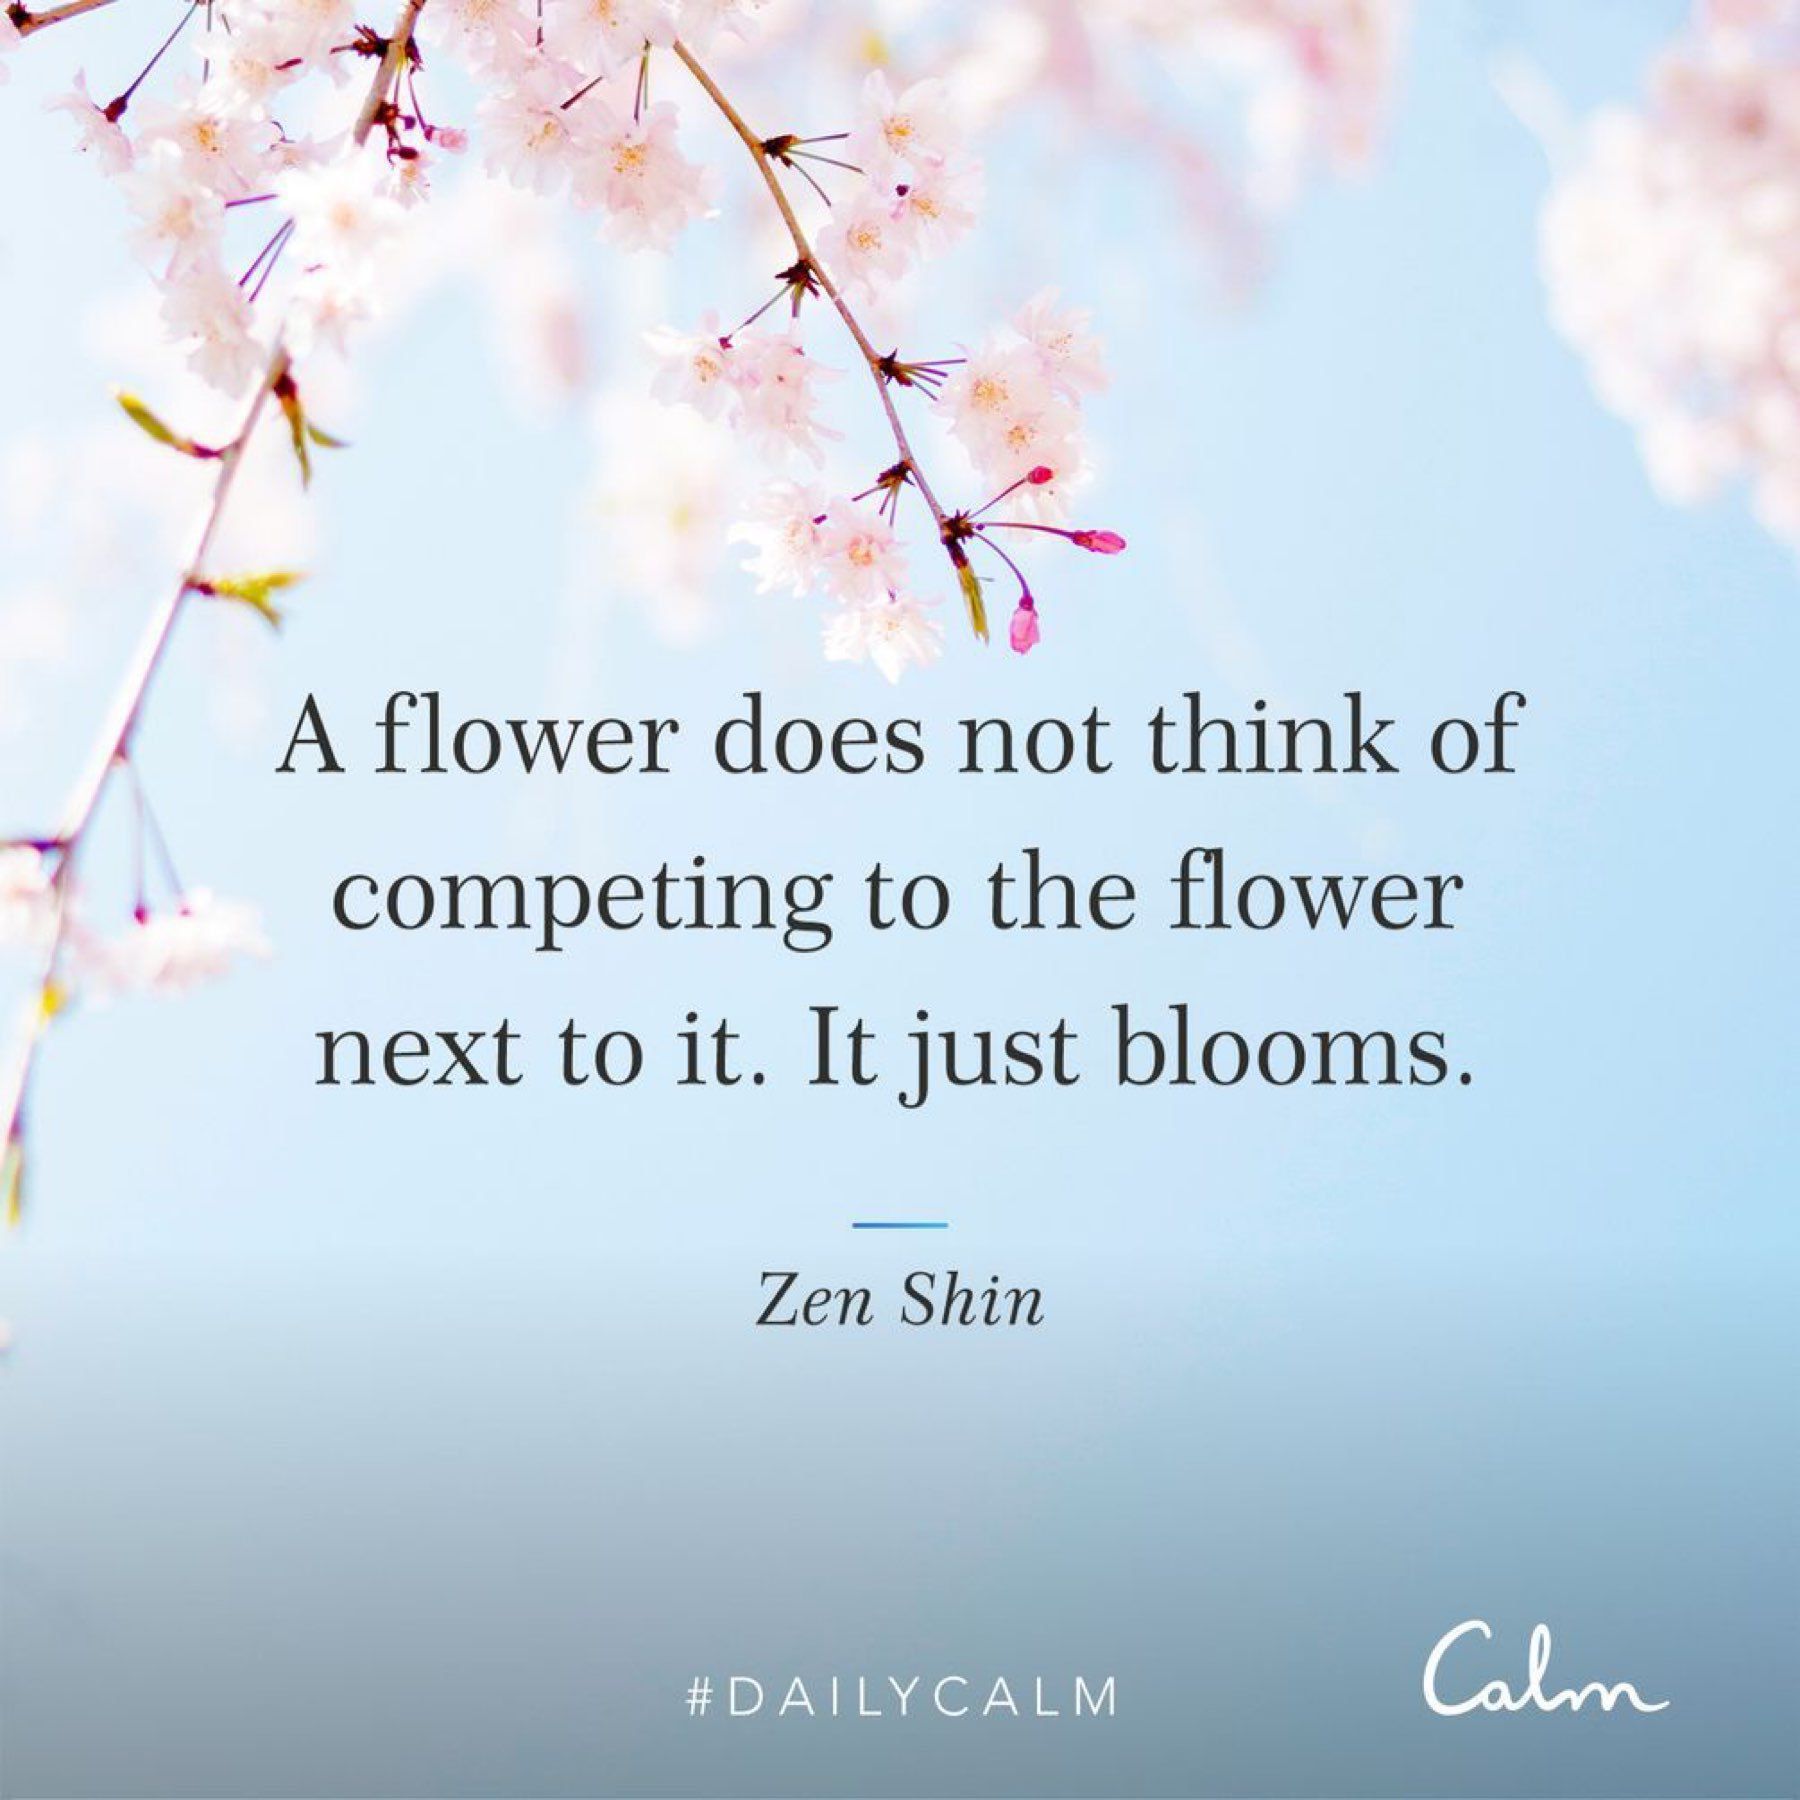 A flower does not compete